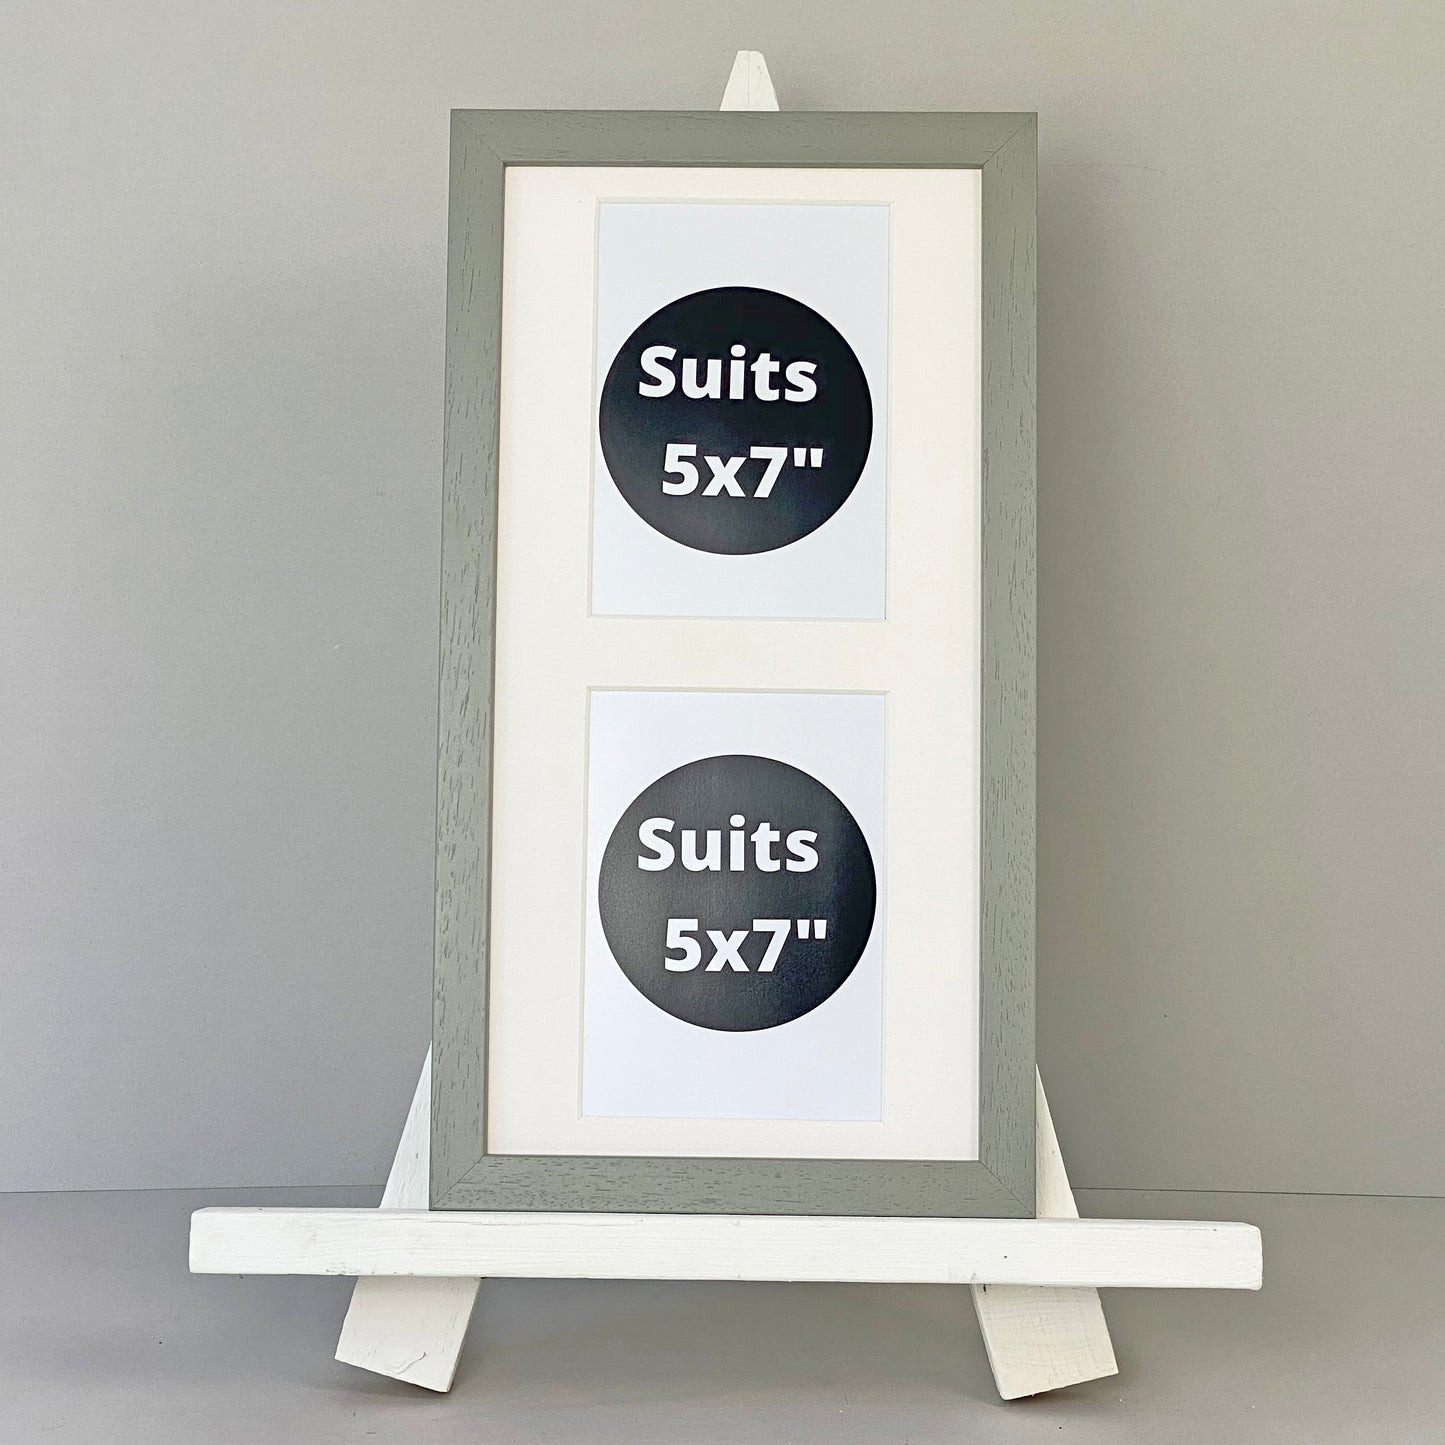 Suits two 5x7" Photos. 20x40cm. Wooden Multi Photo Frame.